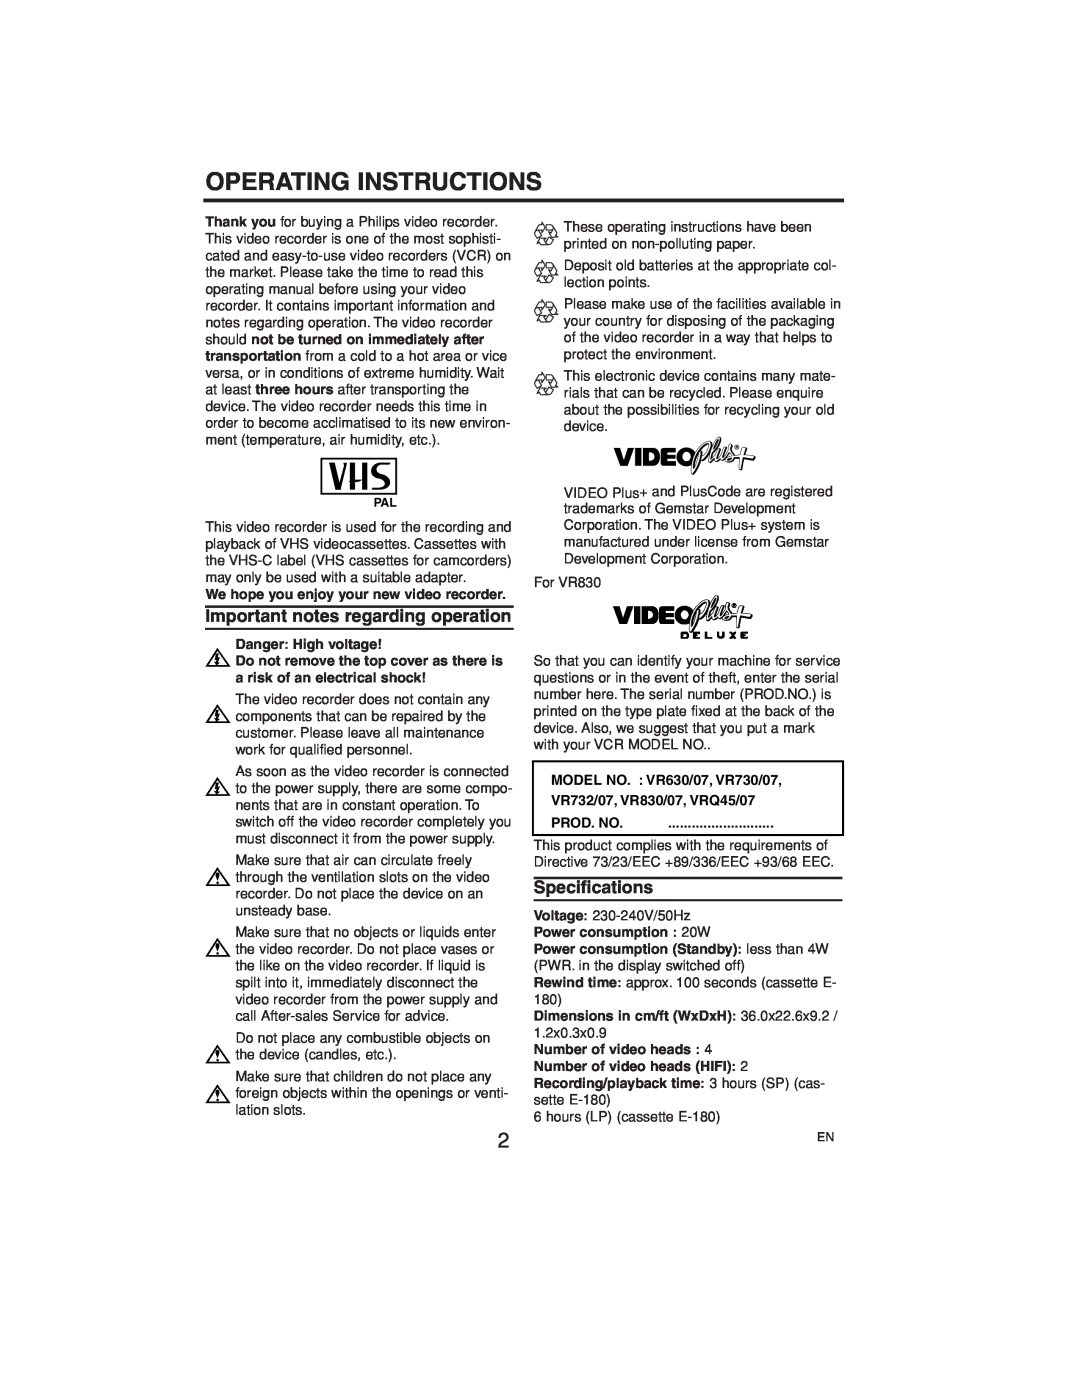 Polycom VR630/07 manual Operating Instructions, Important notes regarding operation, Specifications, Danger High voltage 